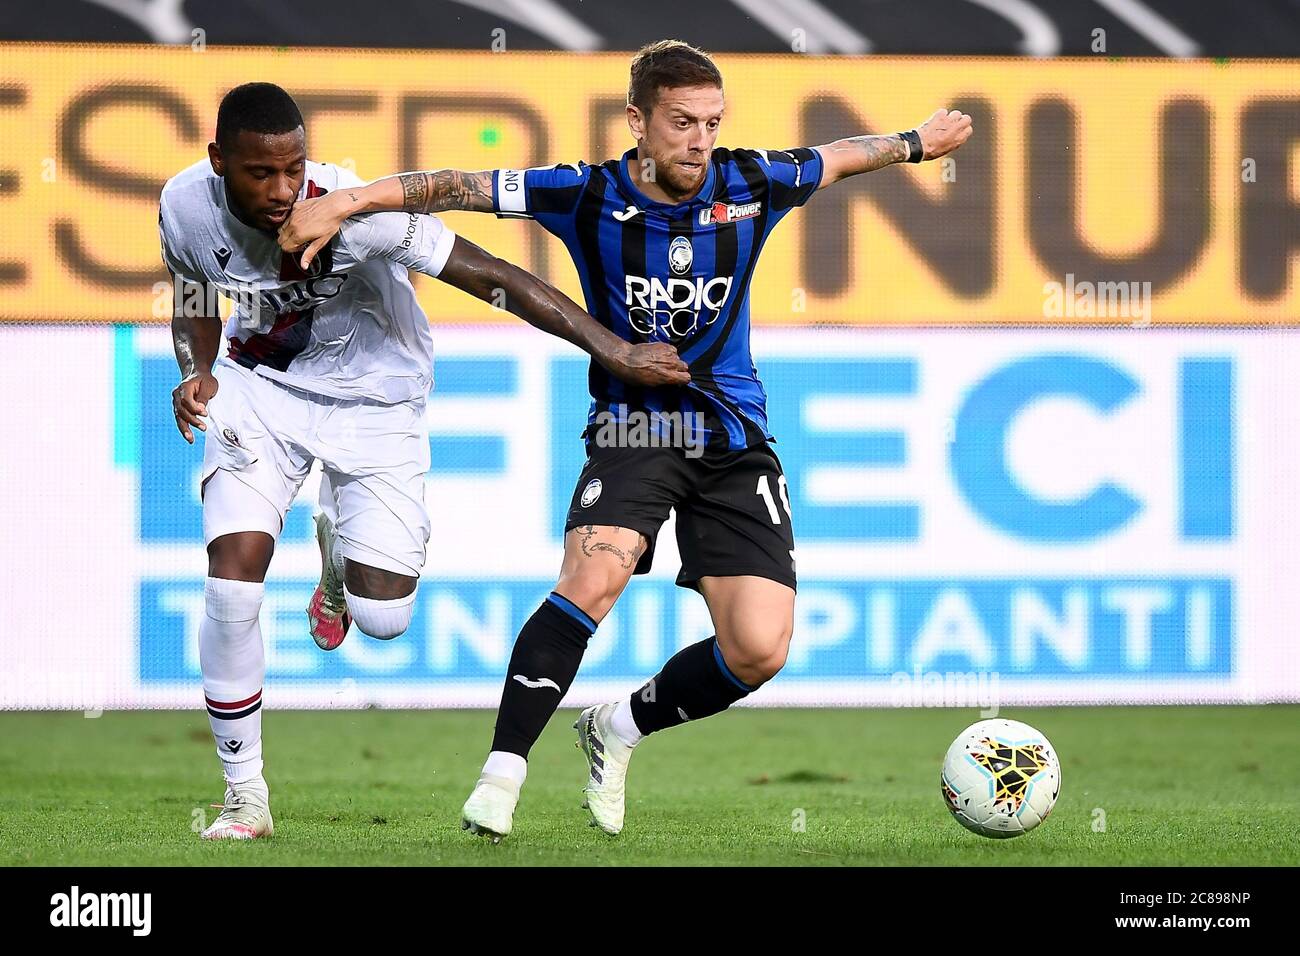 Bergamo, Italy - 21 July, 2020: Alejandro Gomez (R) of Atalanta BC is challenged by Stefano Denswil of Bologna FC during the Serie A football match between Atalanta BC and Bologna FC. Atalanta BC won 1-0 over Bologna FC. Credit: Nicolò Campo/Alamy Live News Stock Photo